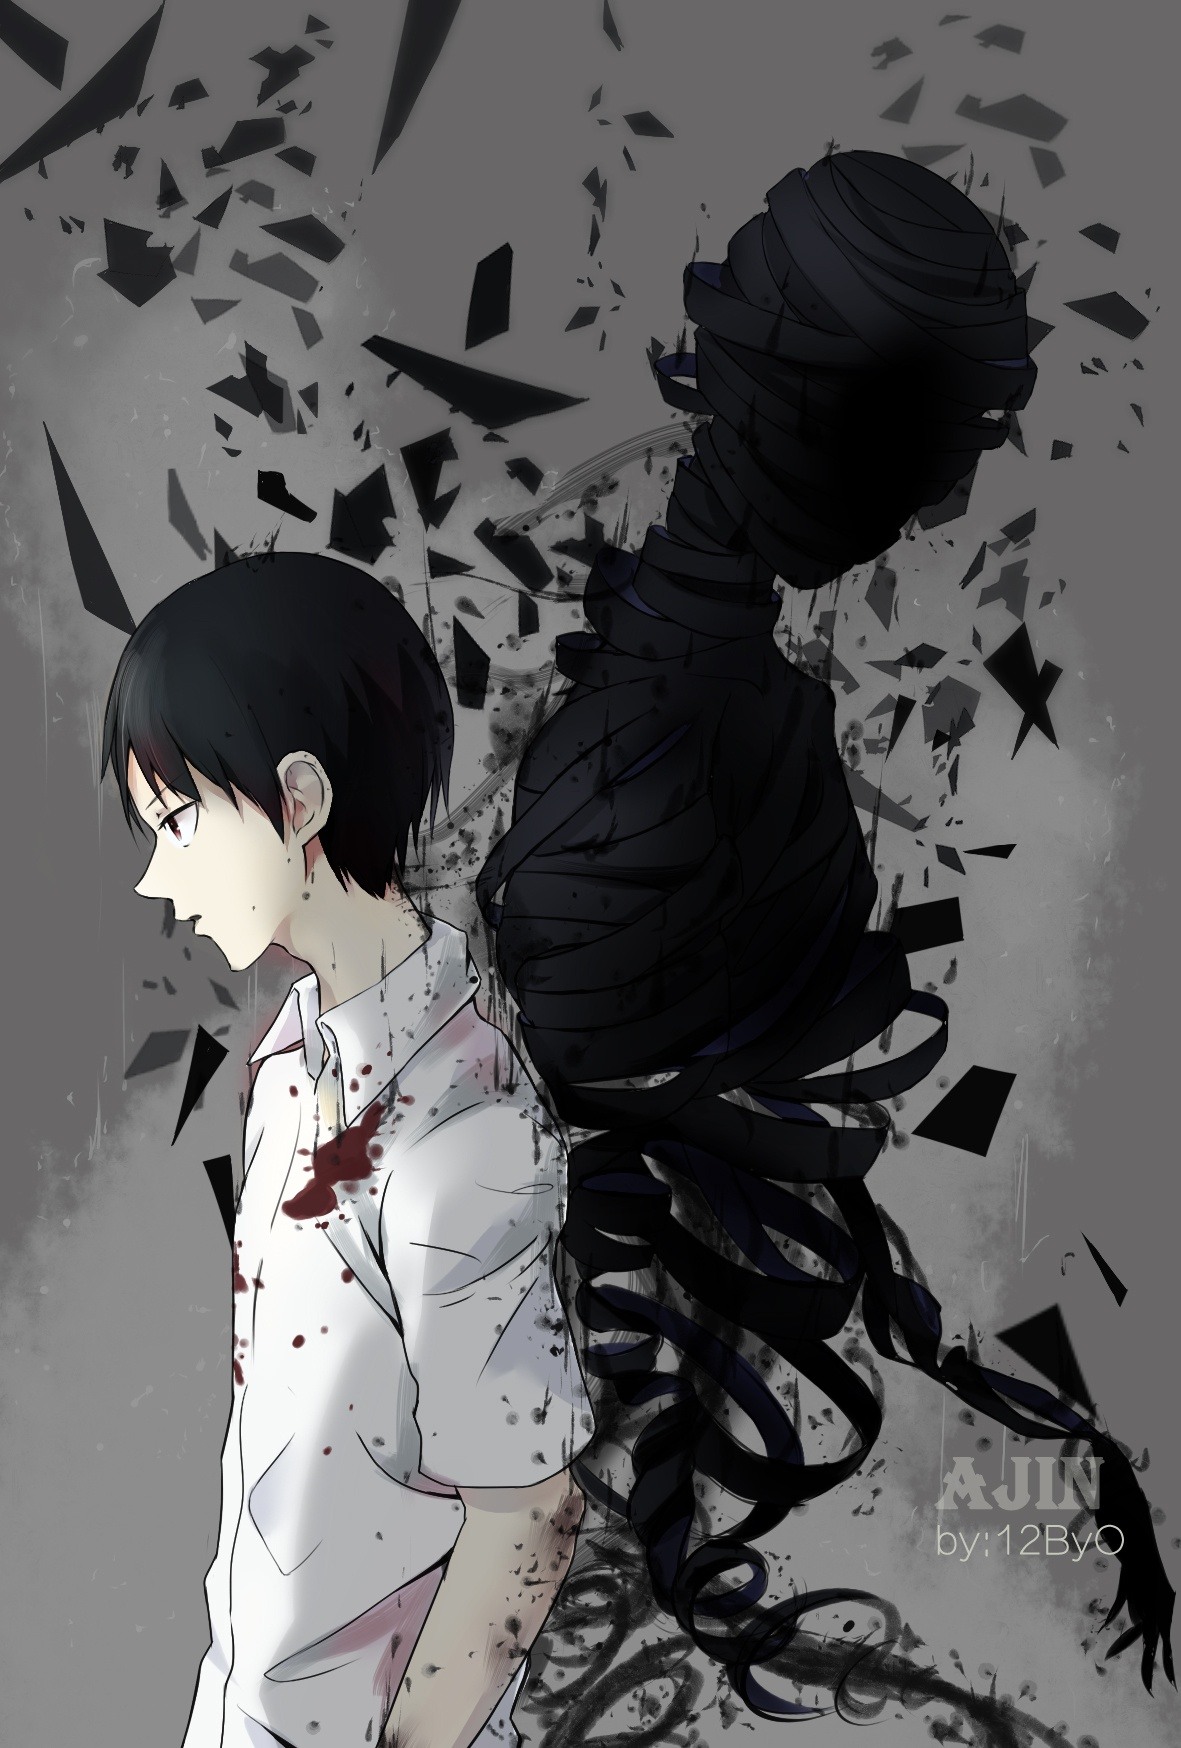 Ajin DemiHuman Film Anime Subtitle Television show ajin television  english fictional Character png  PNGWing